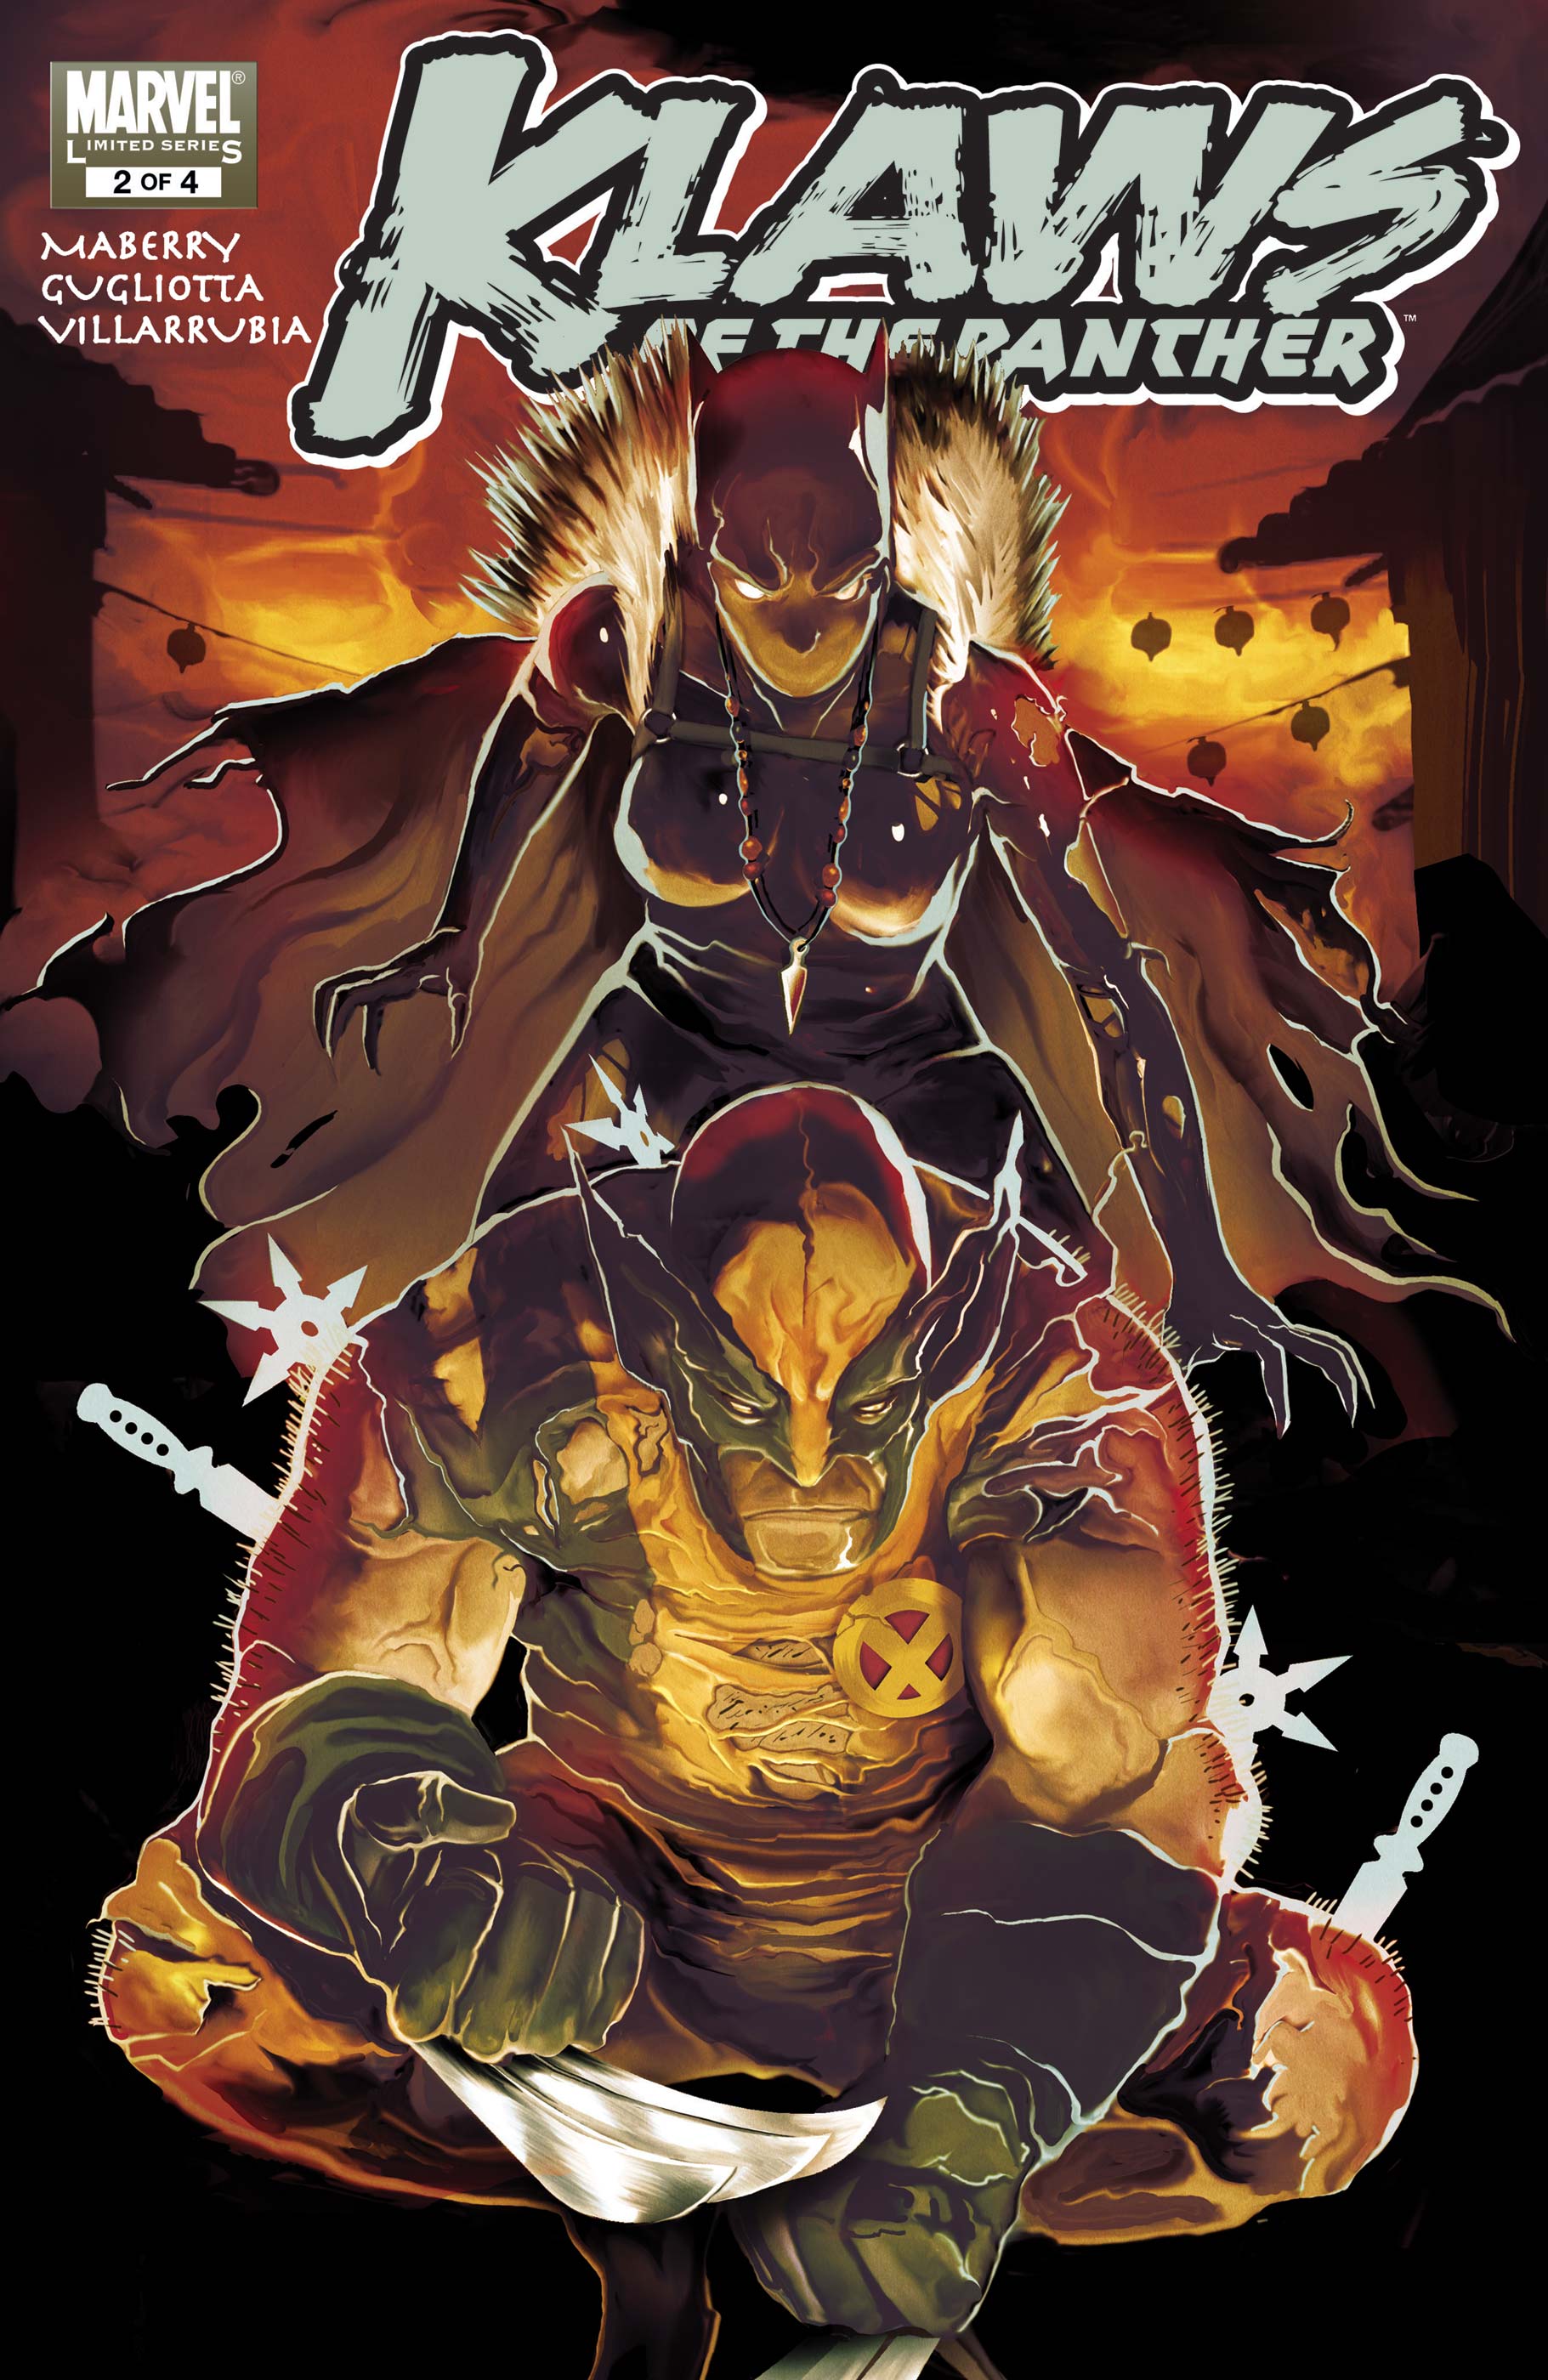 Klaws of the Panther (2010) #2